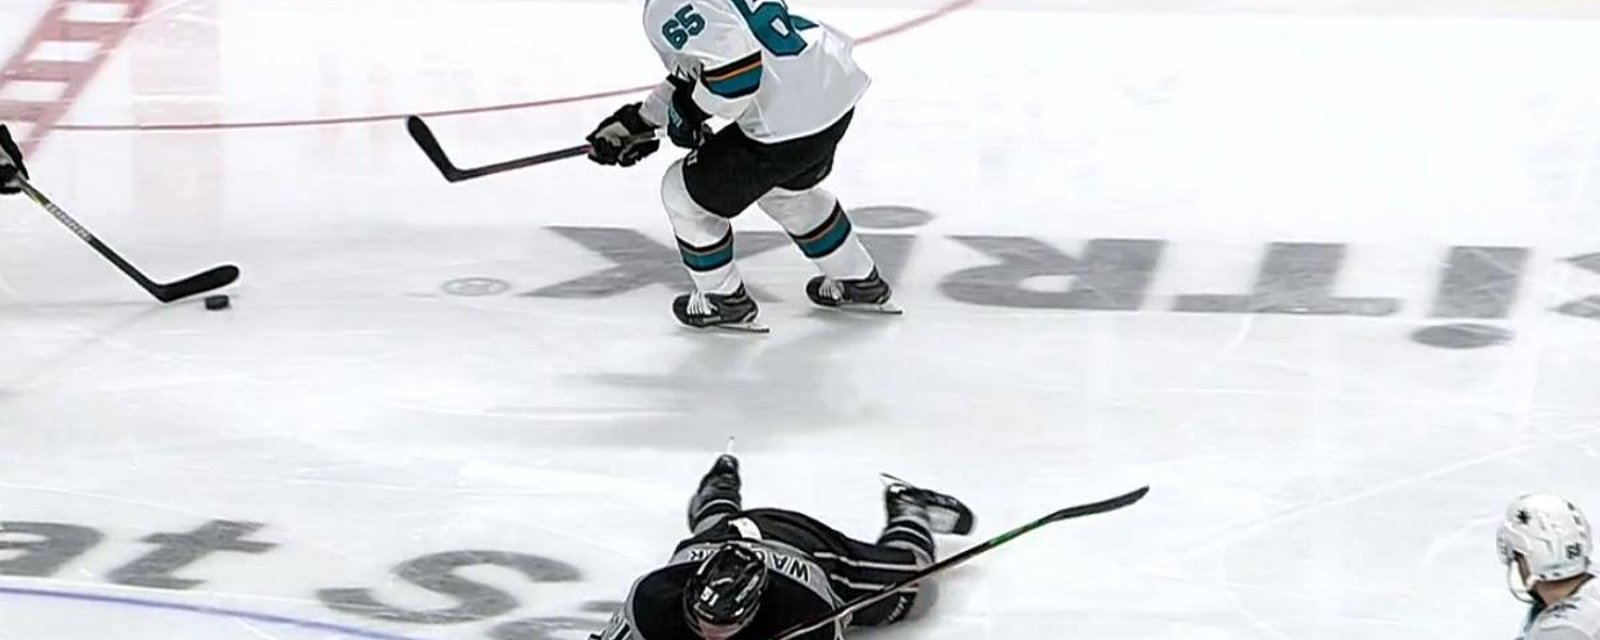 Erik Karlsson sends rookie to the locker room with an ugly head shot.